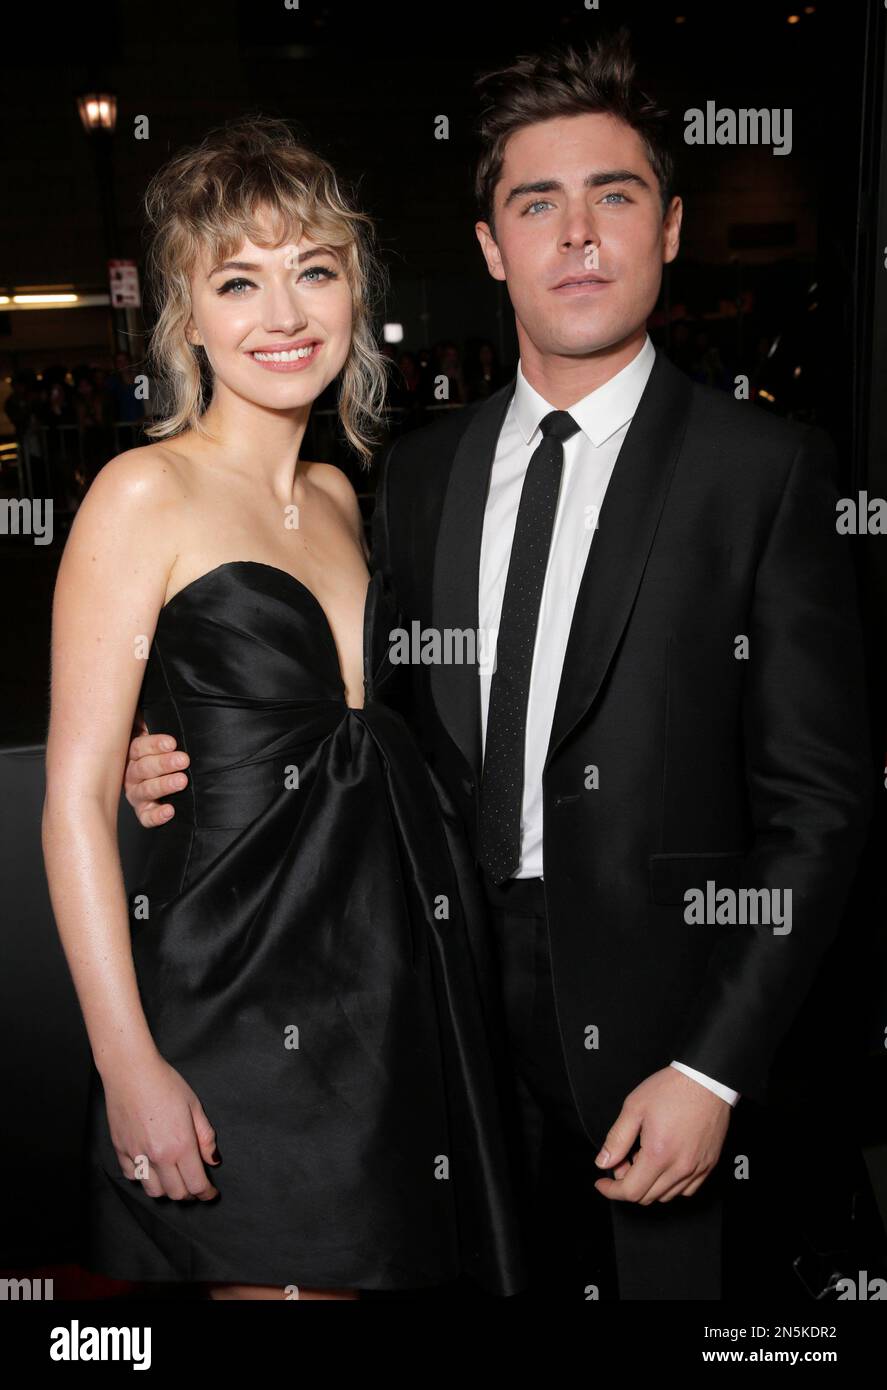 Imogen Poots And Zac Efron Attend The Los Angeles Premiere Of That Awkward Moment Premiere On